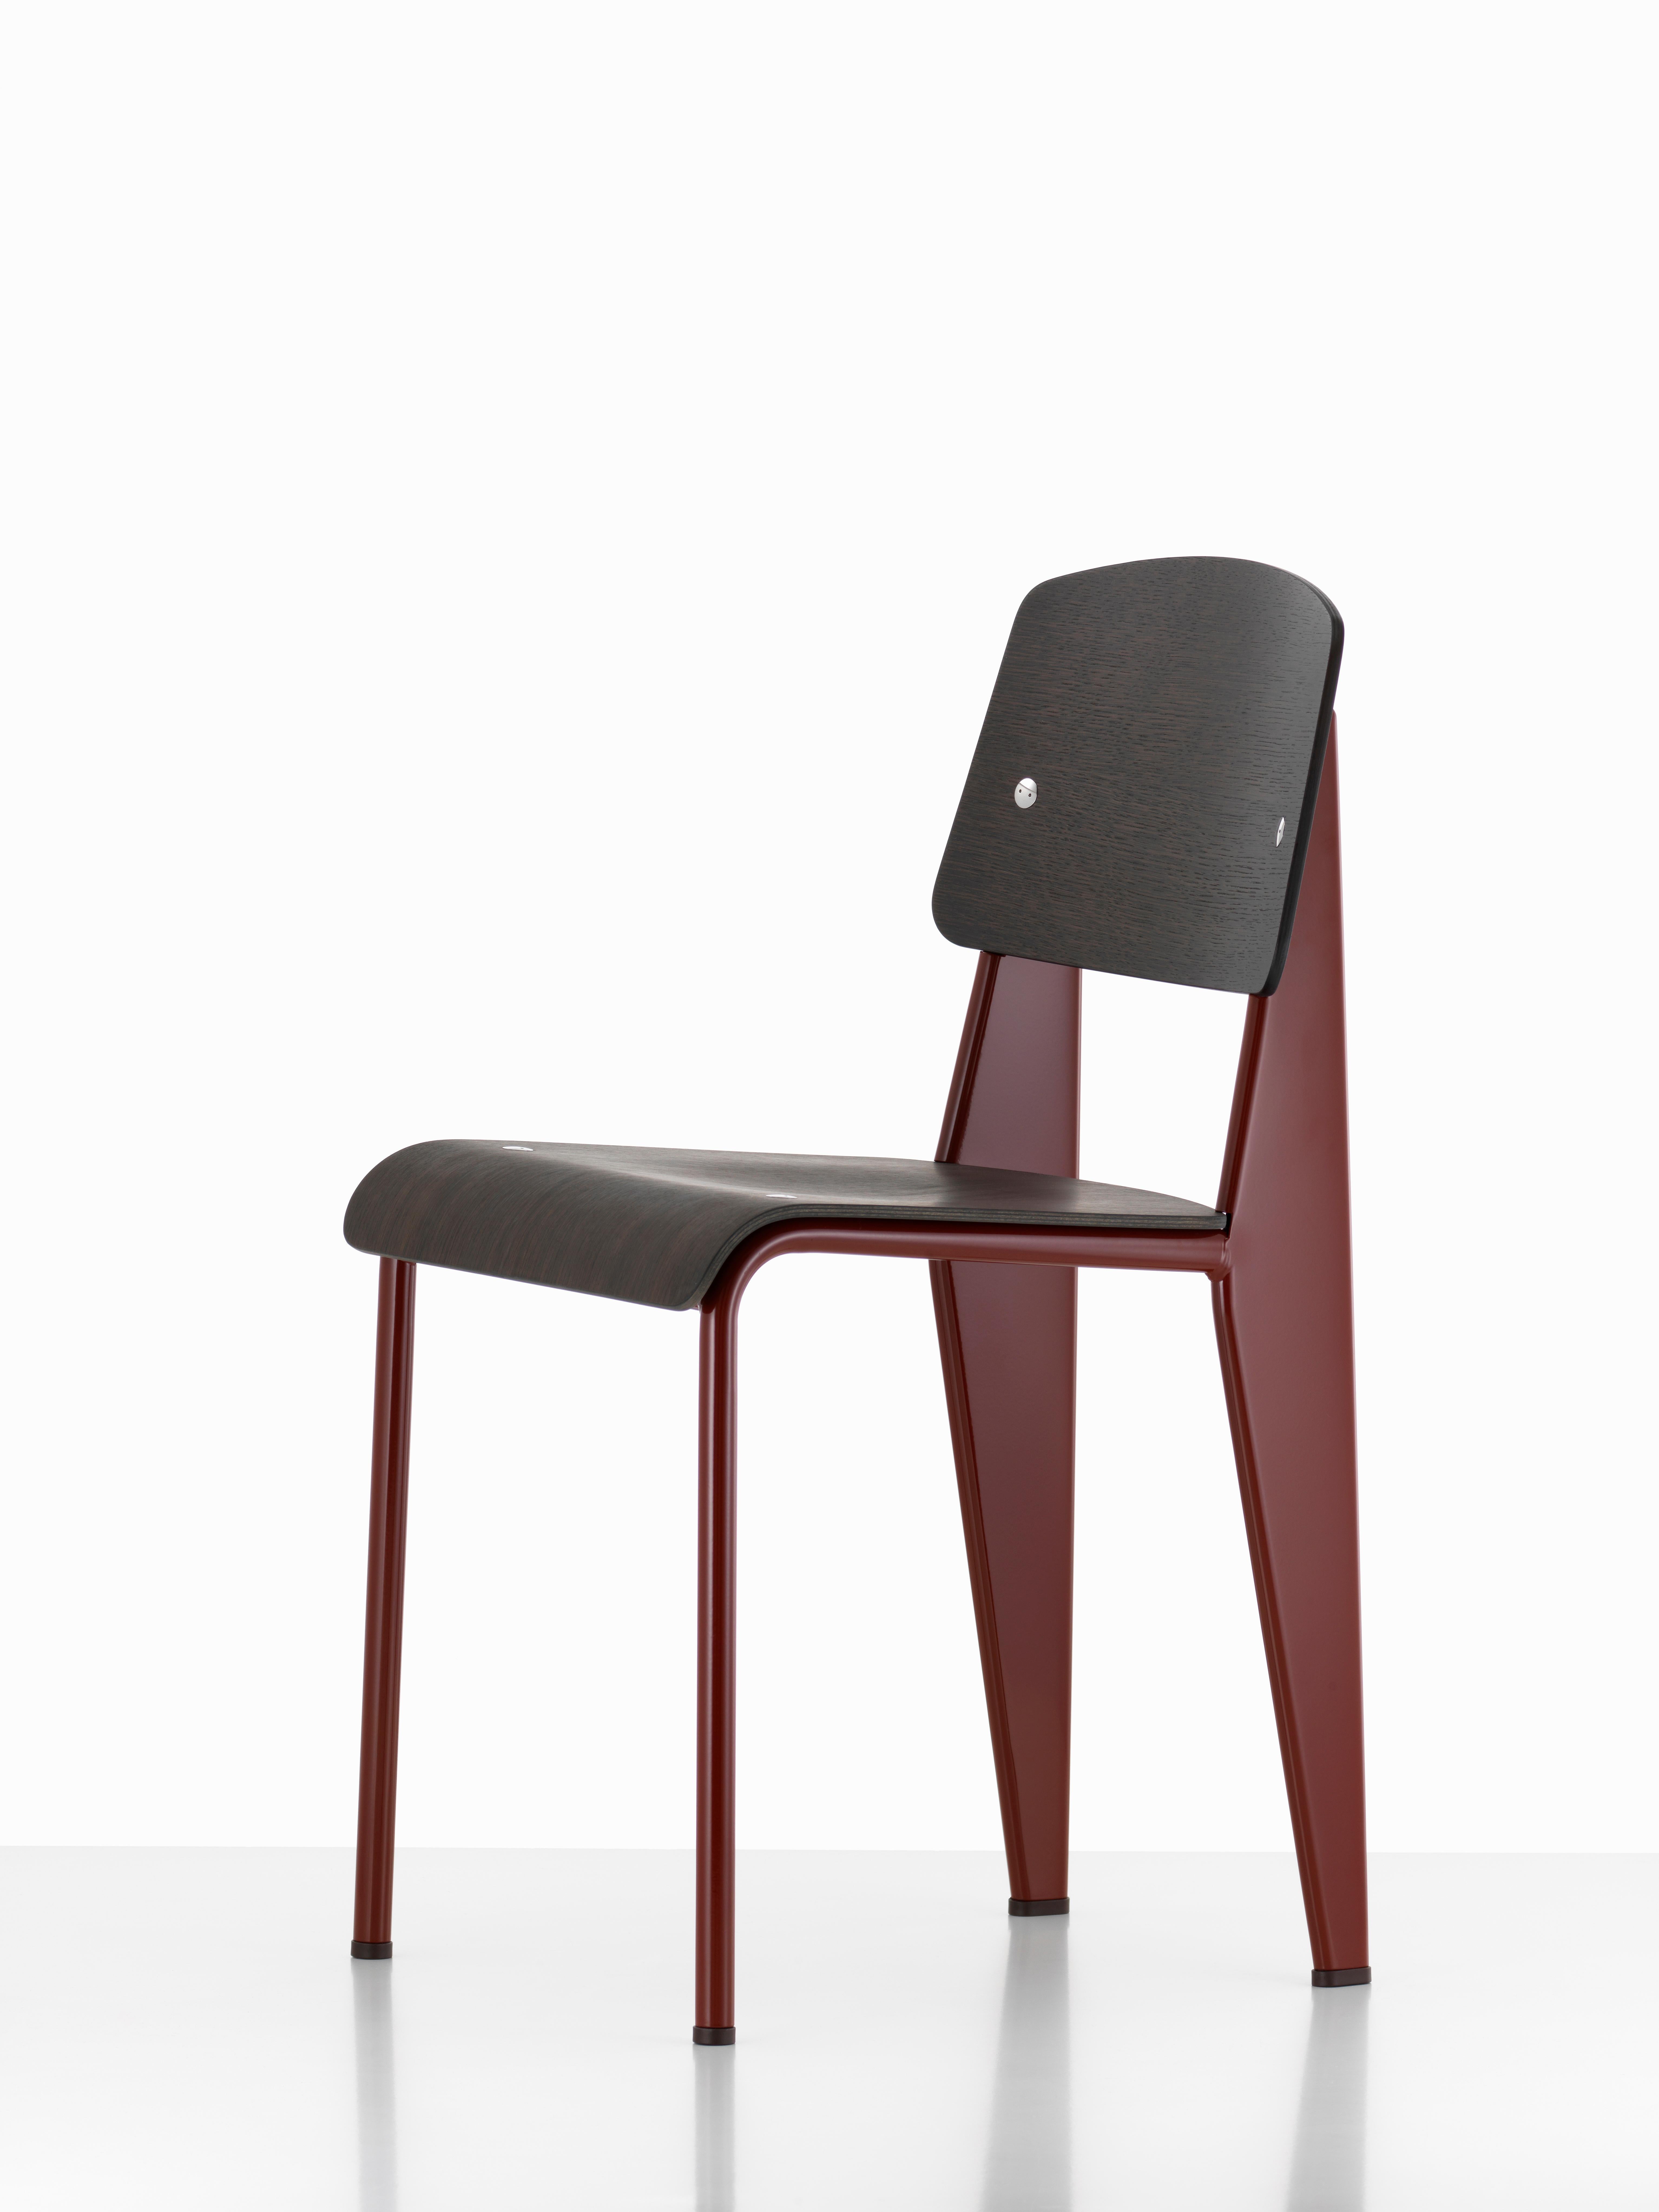 Jean Prouvé Standard Chair in Natural Oak and Black Metal for Vitra